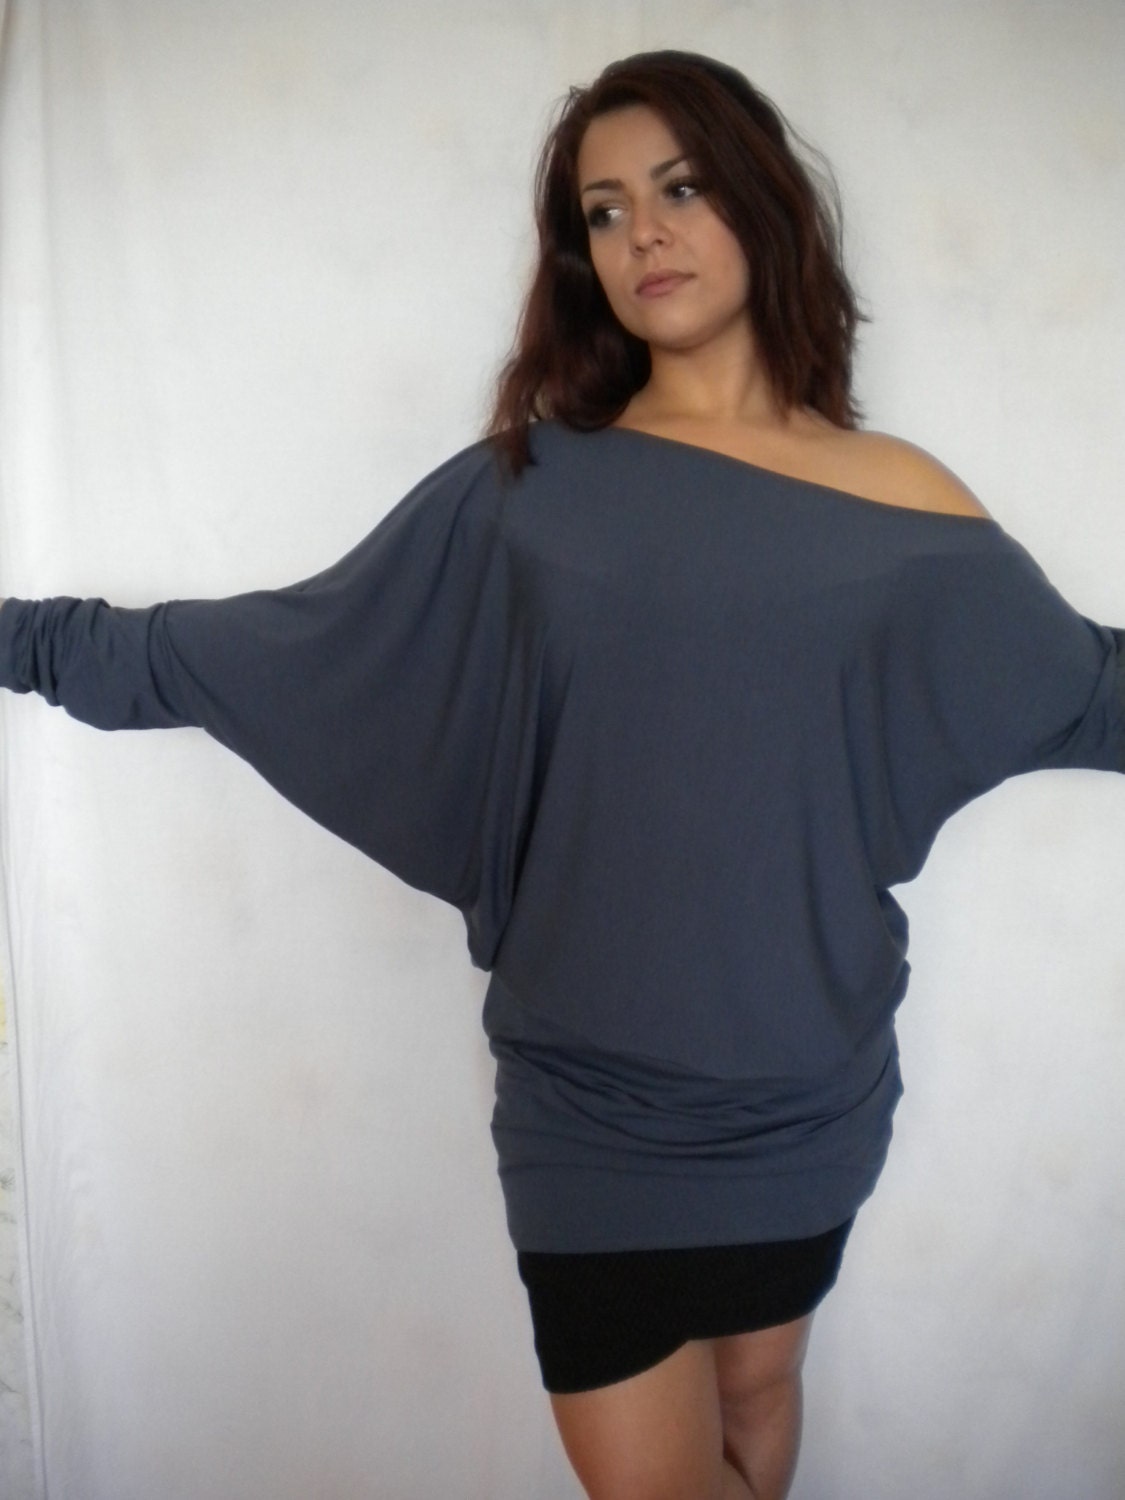 Plus Size off Shoulder Sweater, Asymmetric Batwing Sleeve Top ...